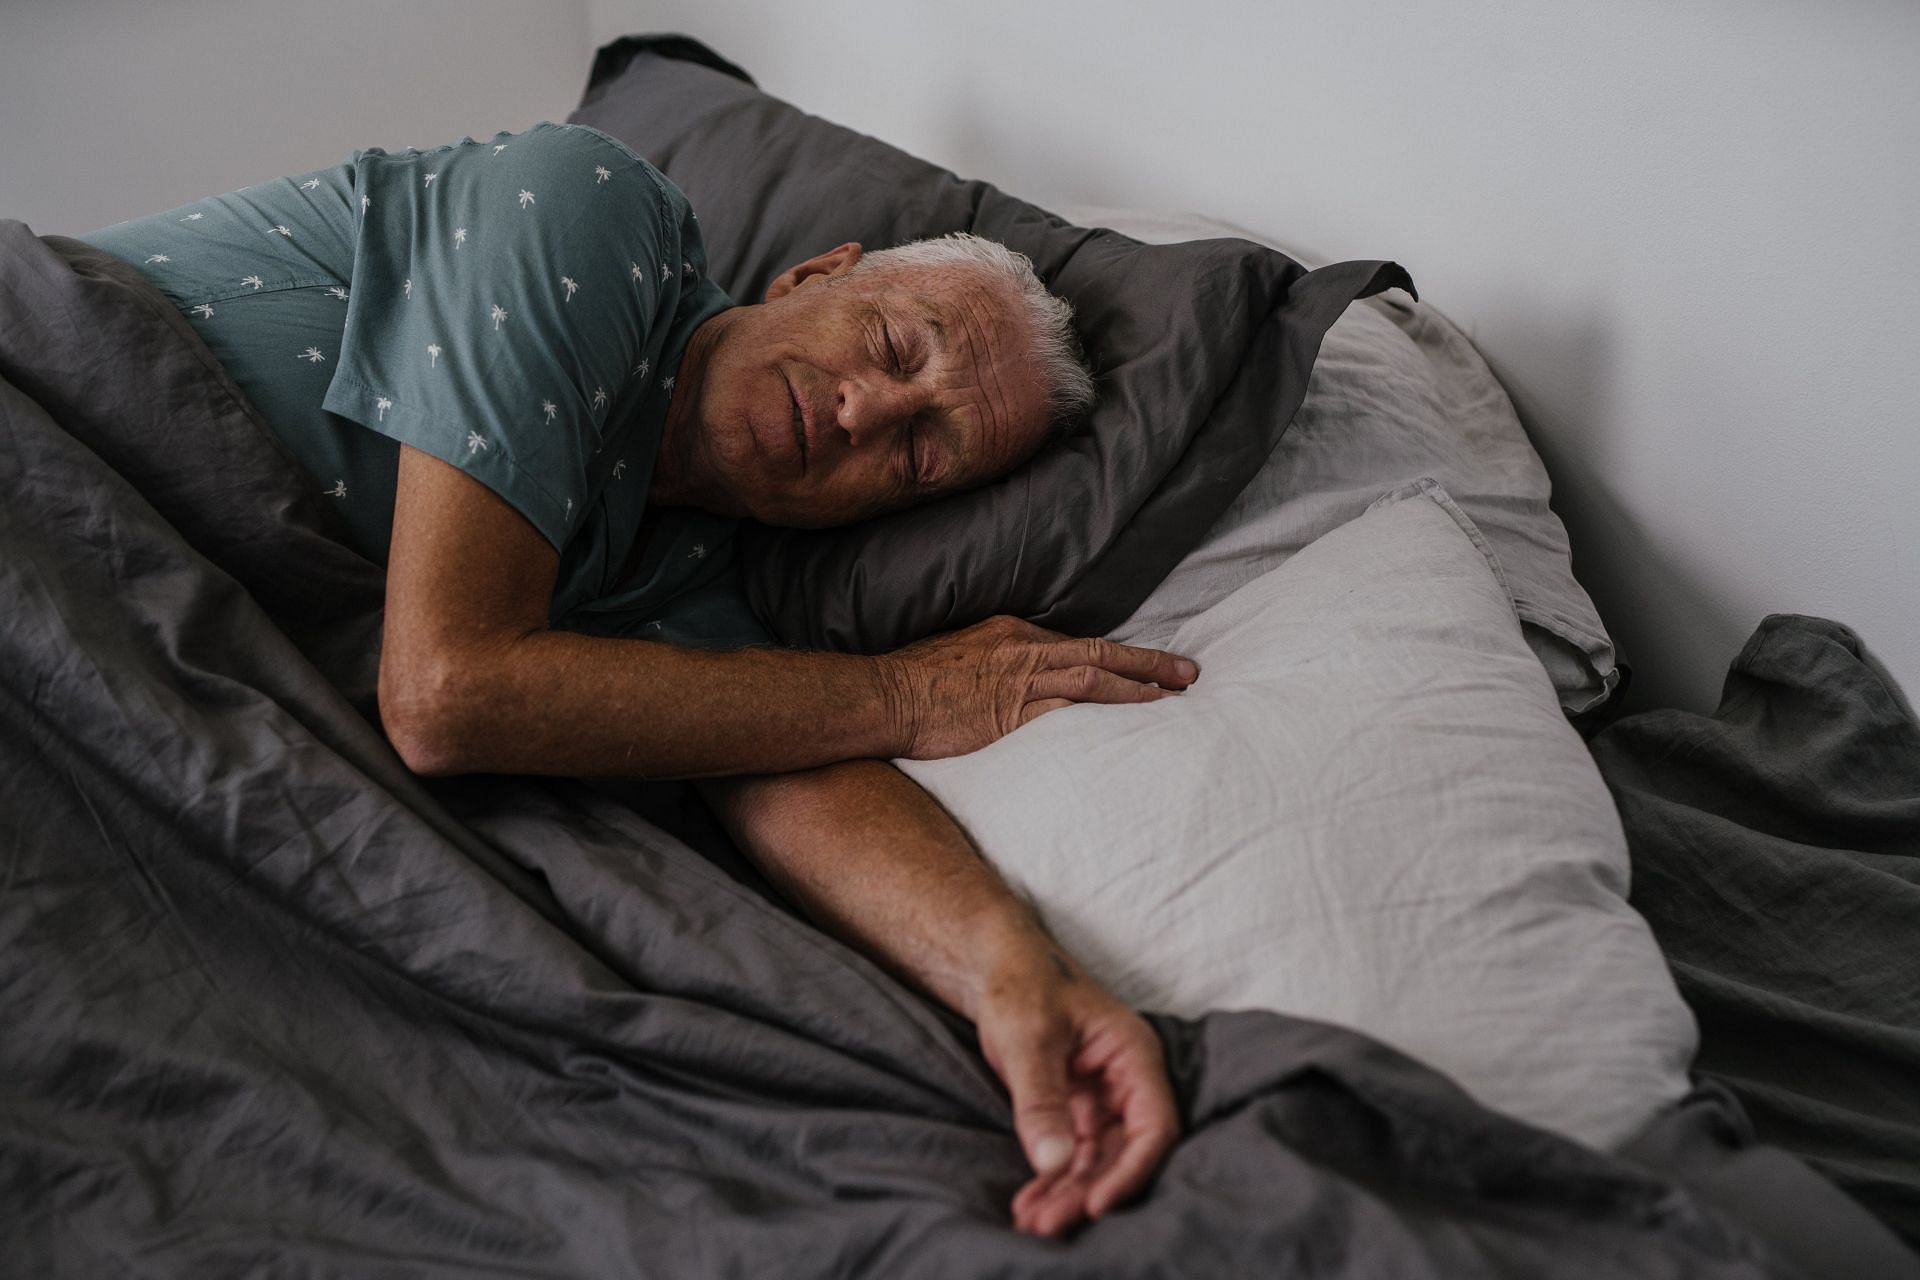 Importance of sleep quality as a signs you are aging well (image sourced via Pexels / Photo by shvets)